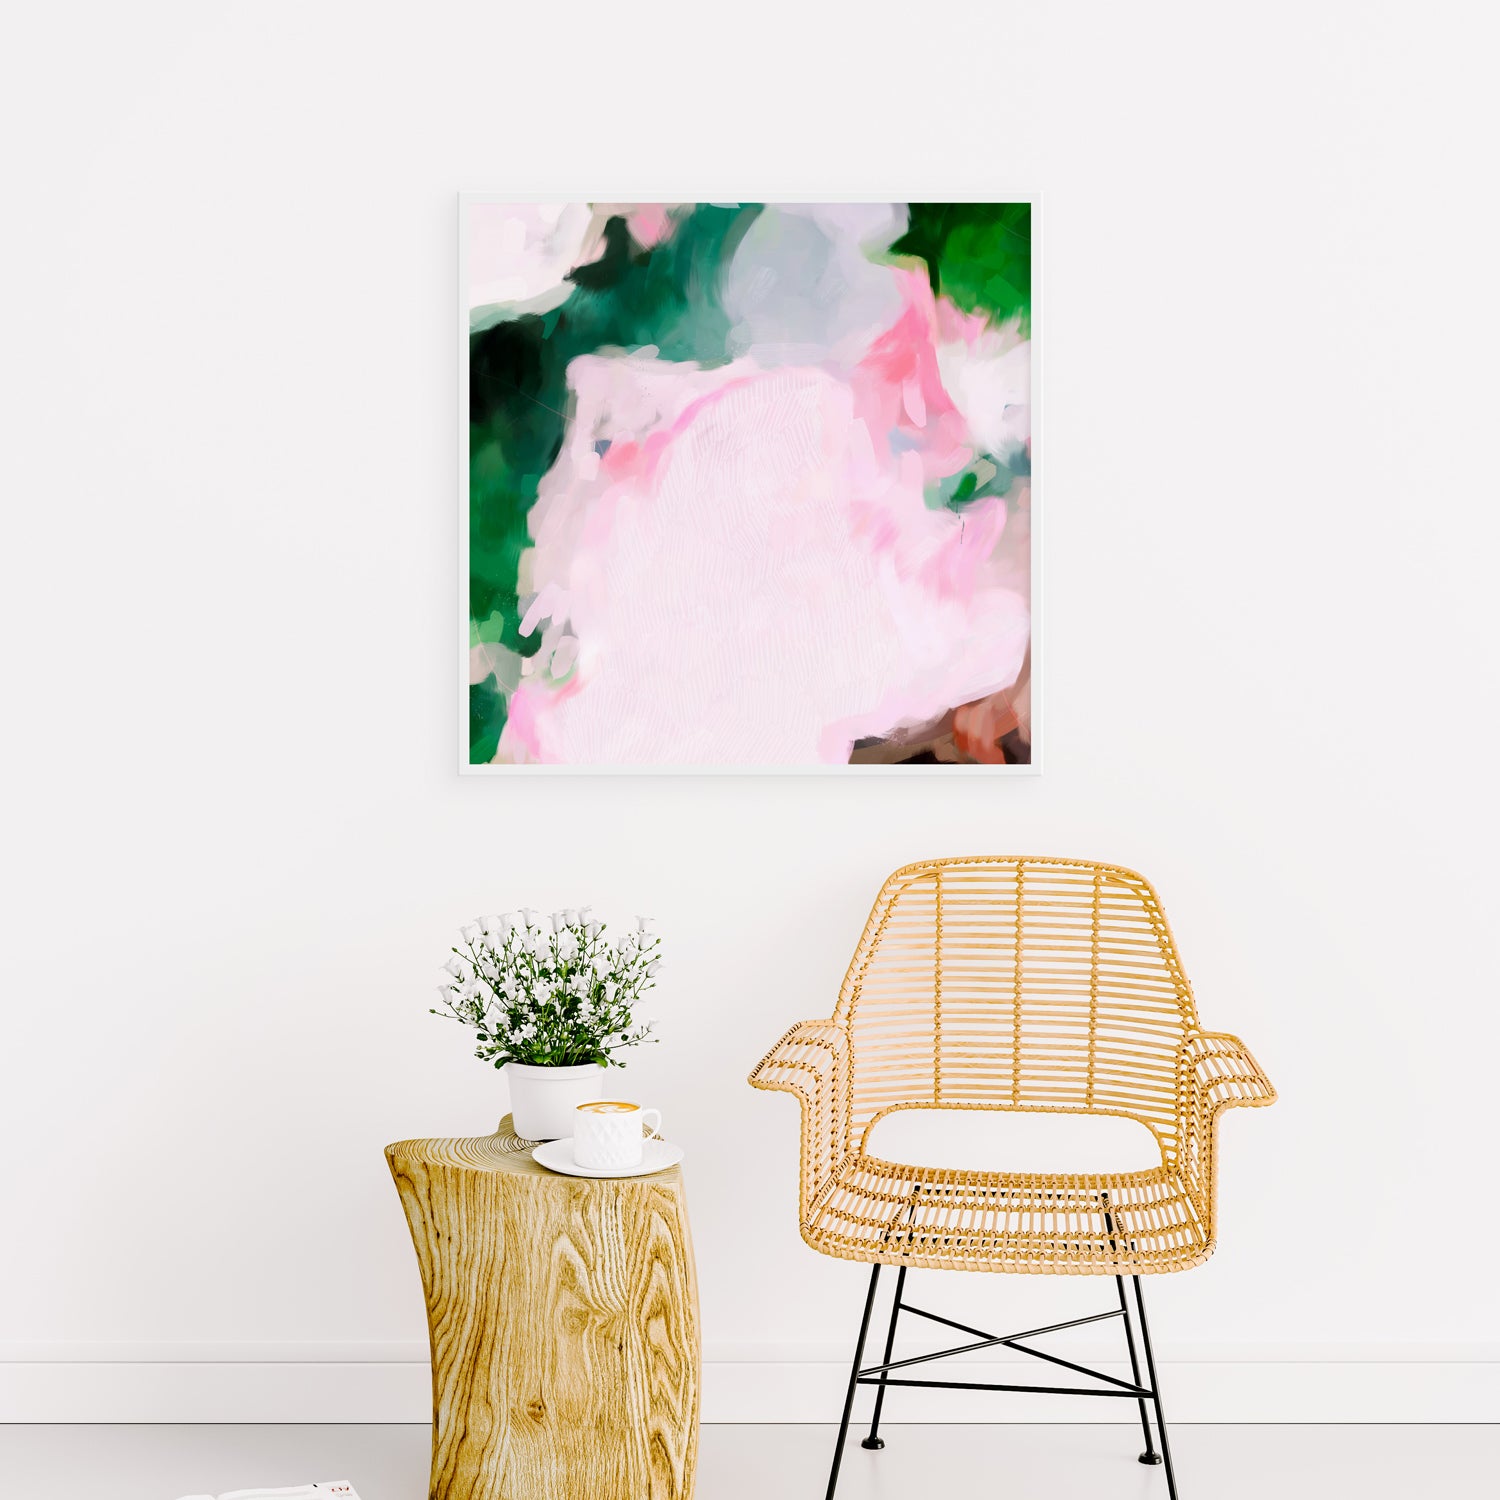 Jolie, large square pink and green abstract art print by Parima Studio